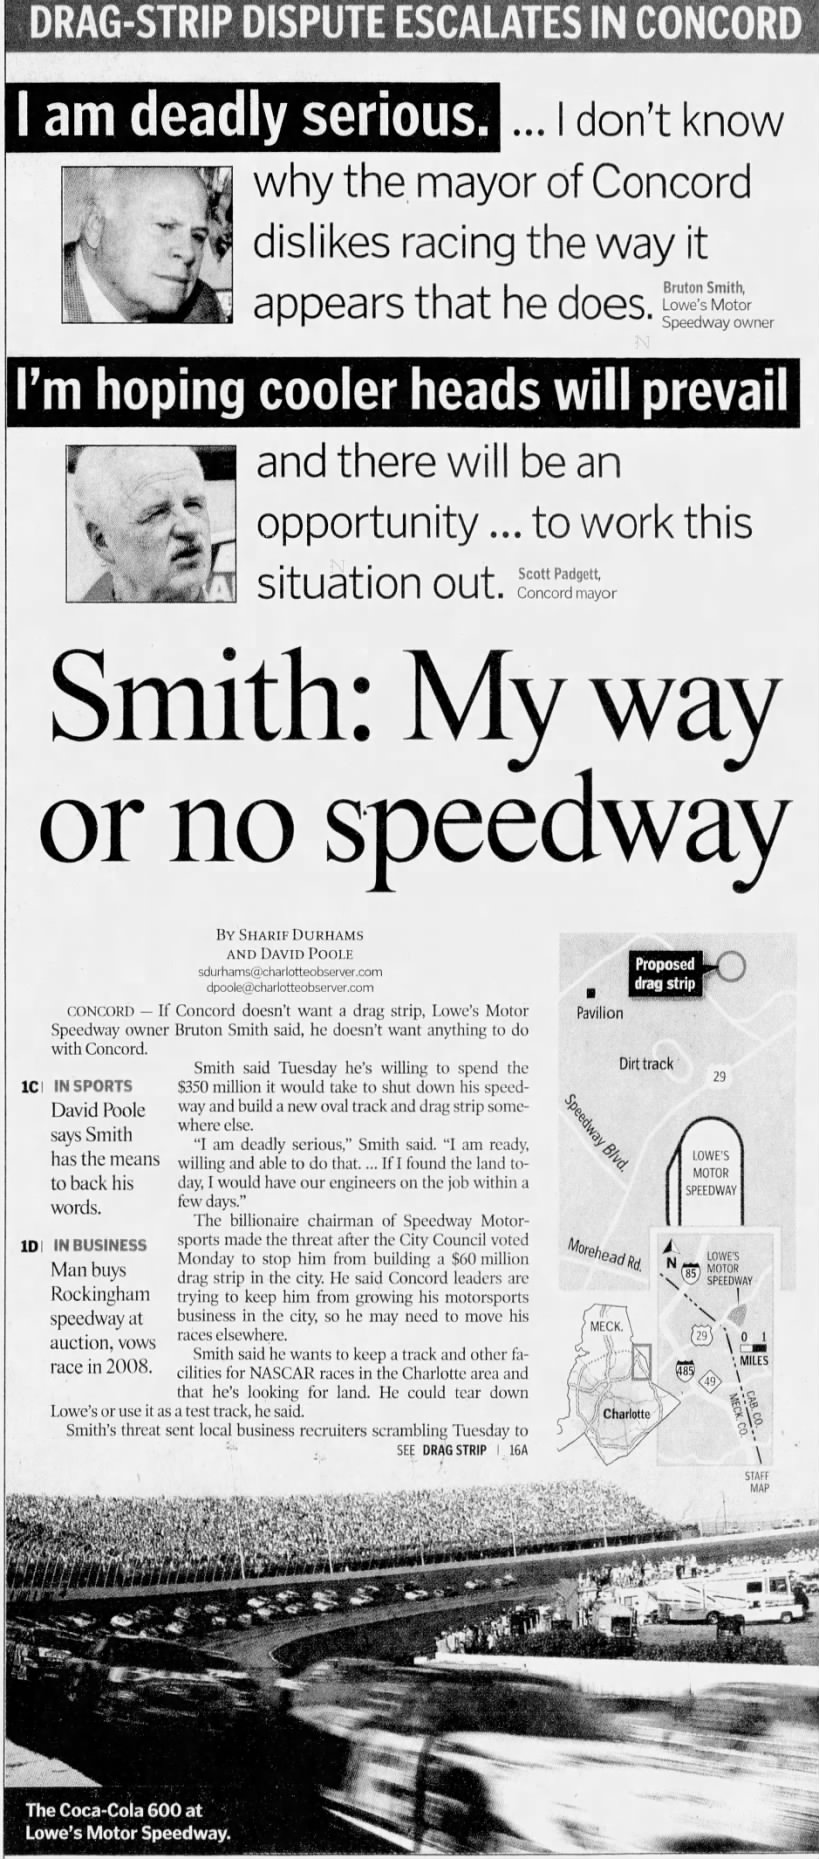 Smith: My way or no speedway (Part 1)